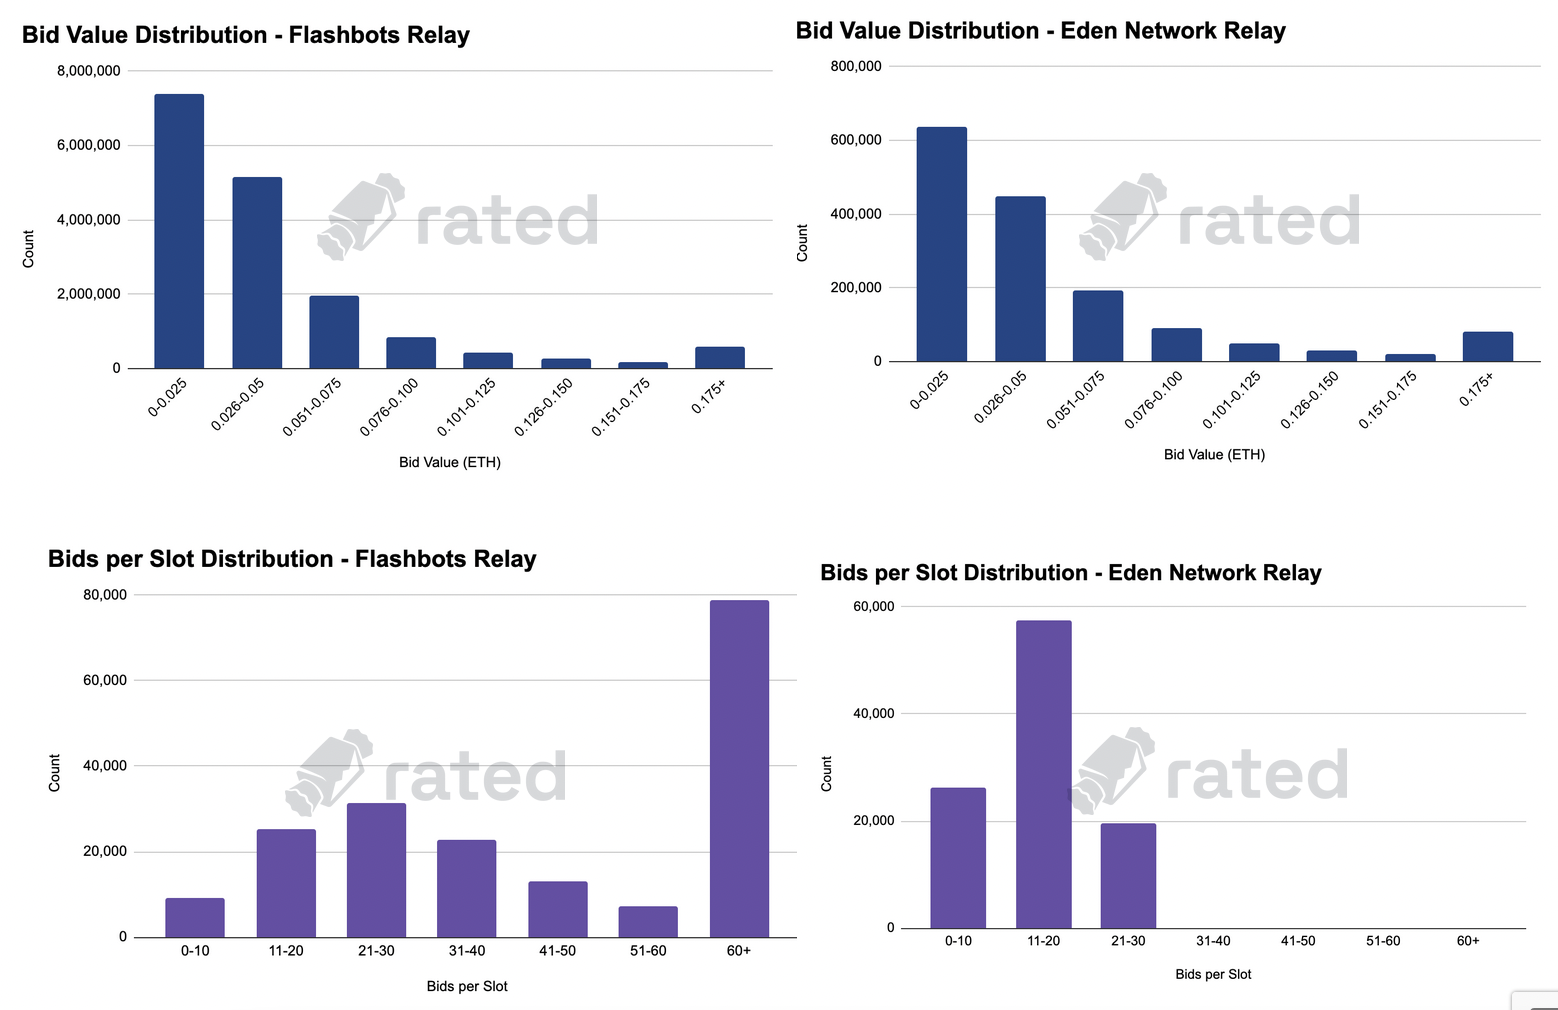 Figure 15: Distributions of bid value and number of bids received per slot for Eden and Flashbots relays